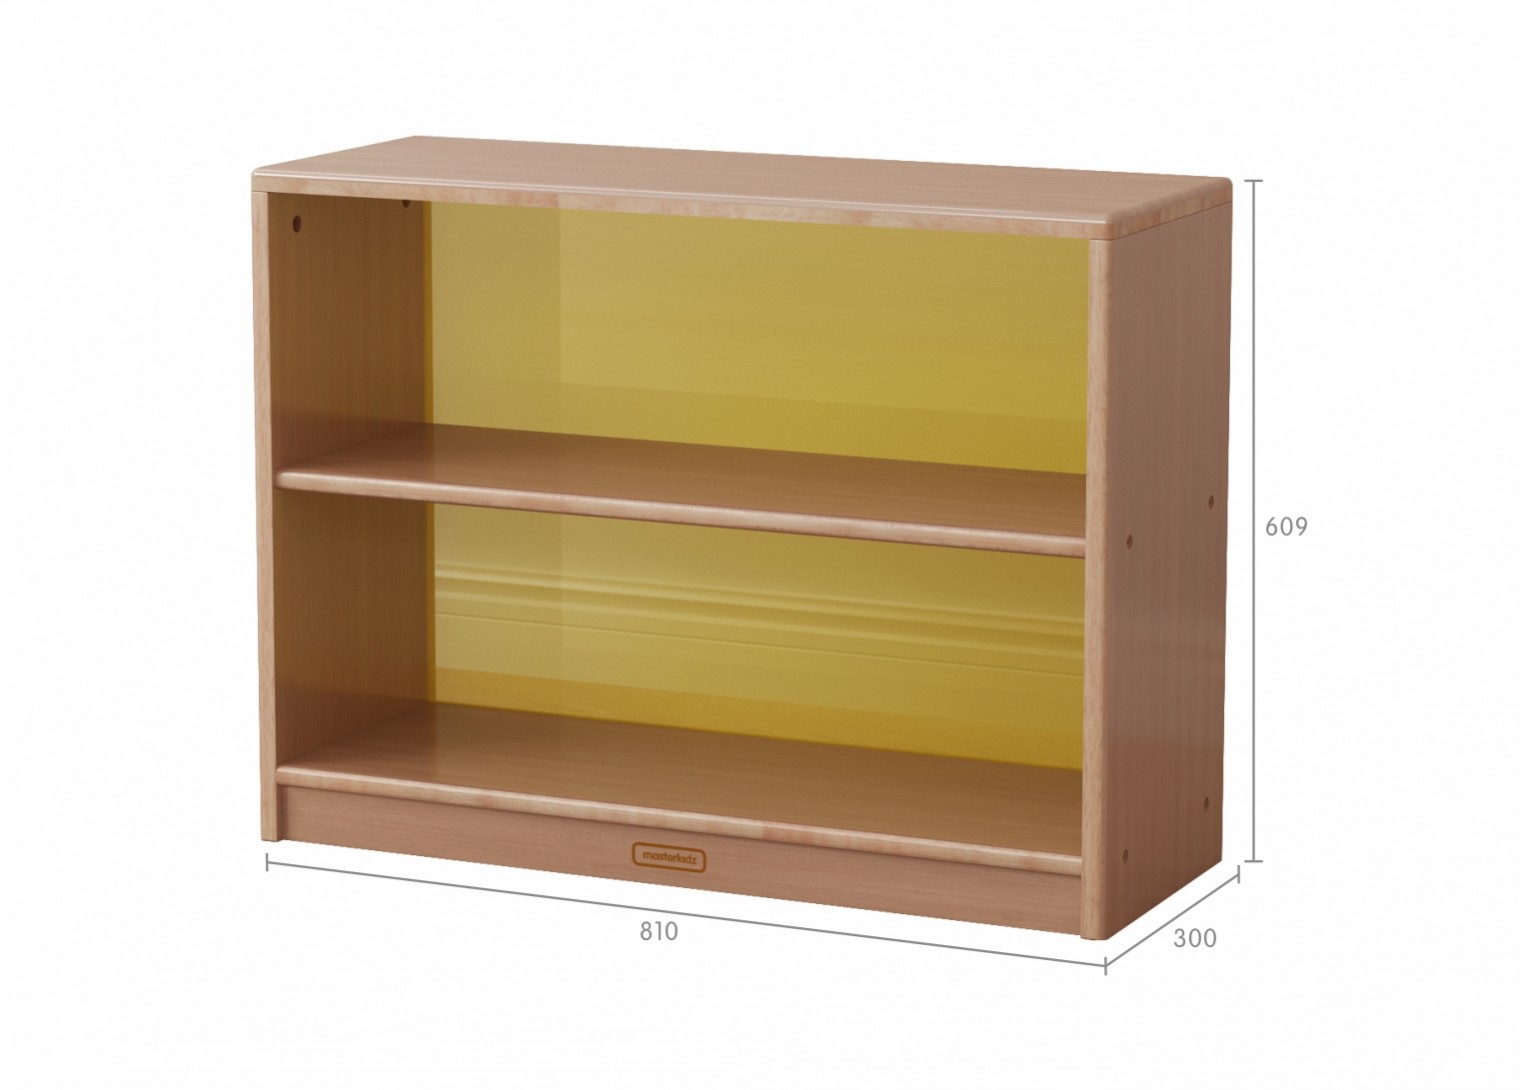 Forest School - 609H x 810L Wooden  Shelving Unit - Translucent Yellow Back